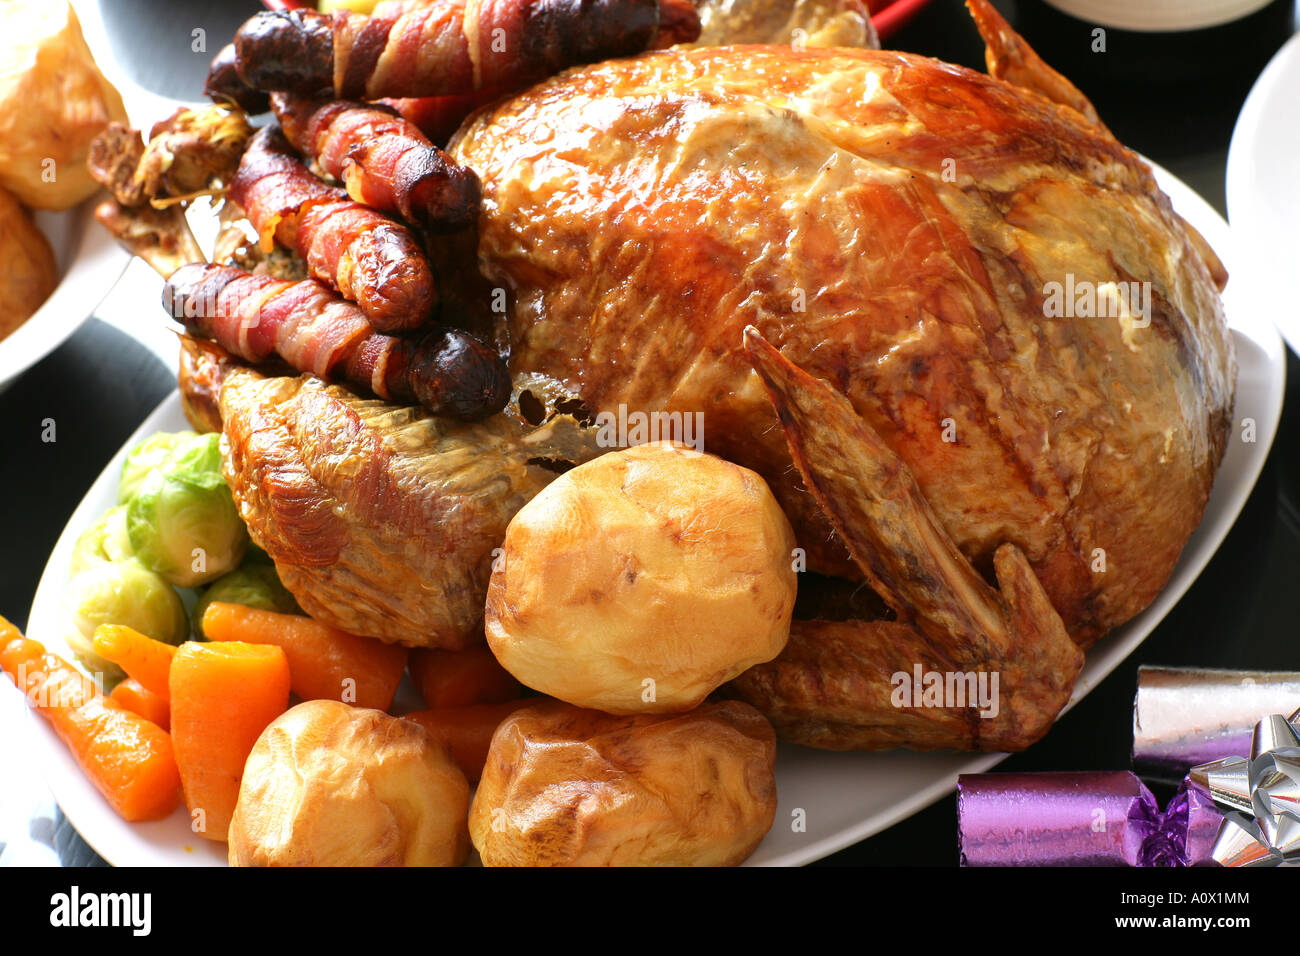 Christmas Dinner Turkey Pudding High Resolution Stock Photography And Images Alamy